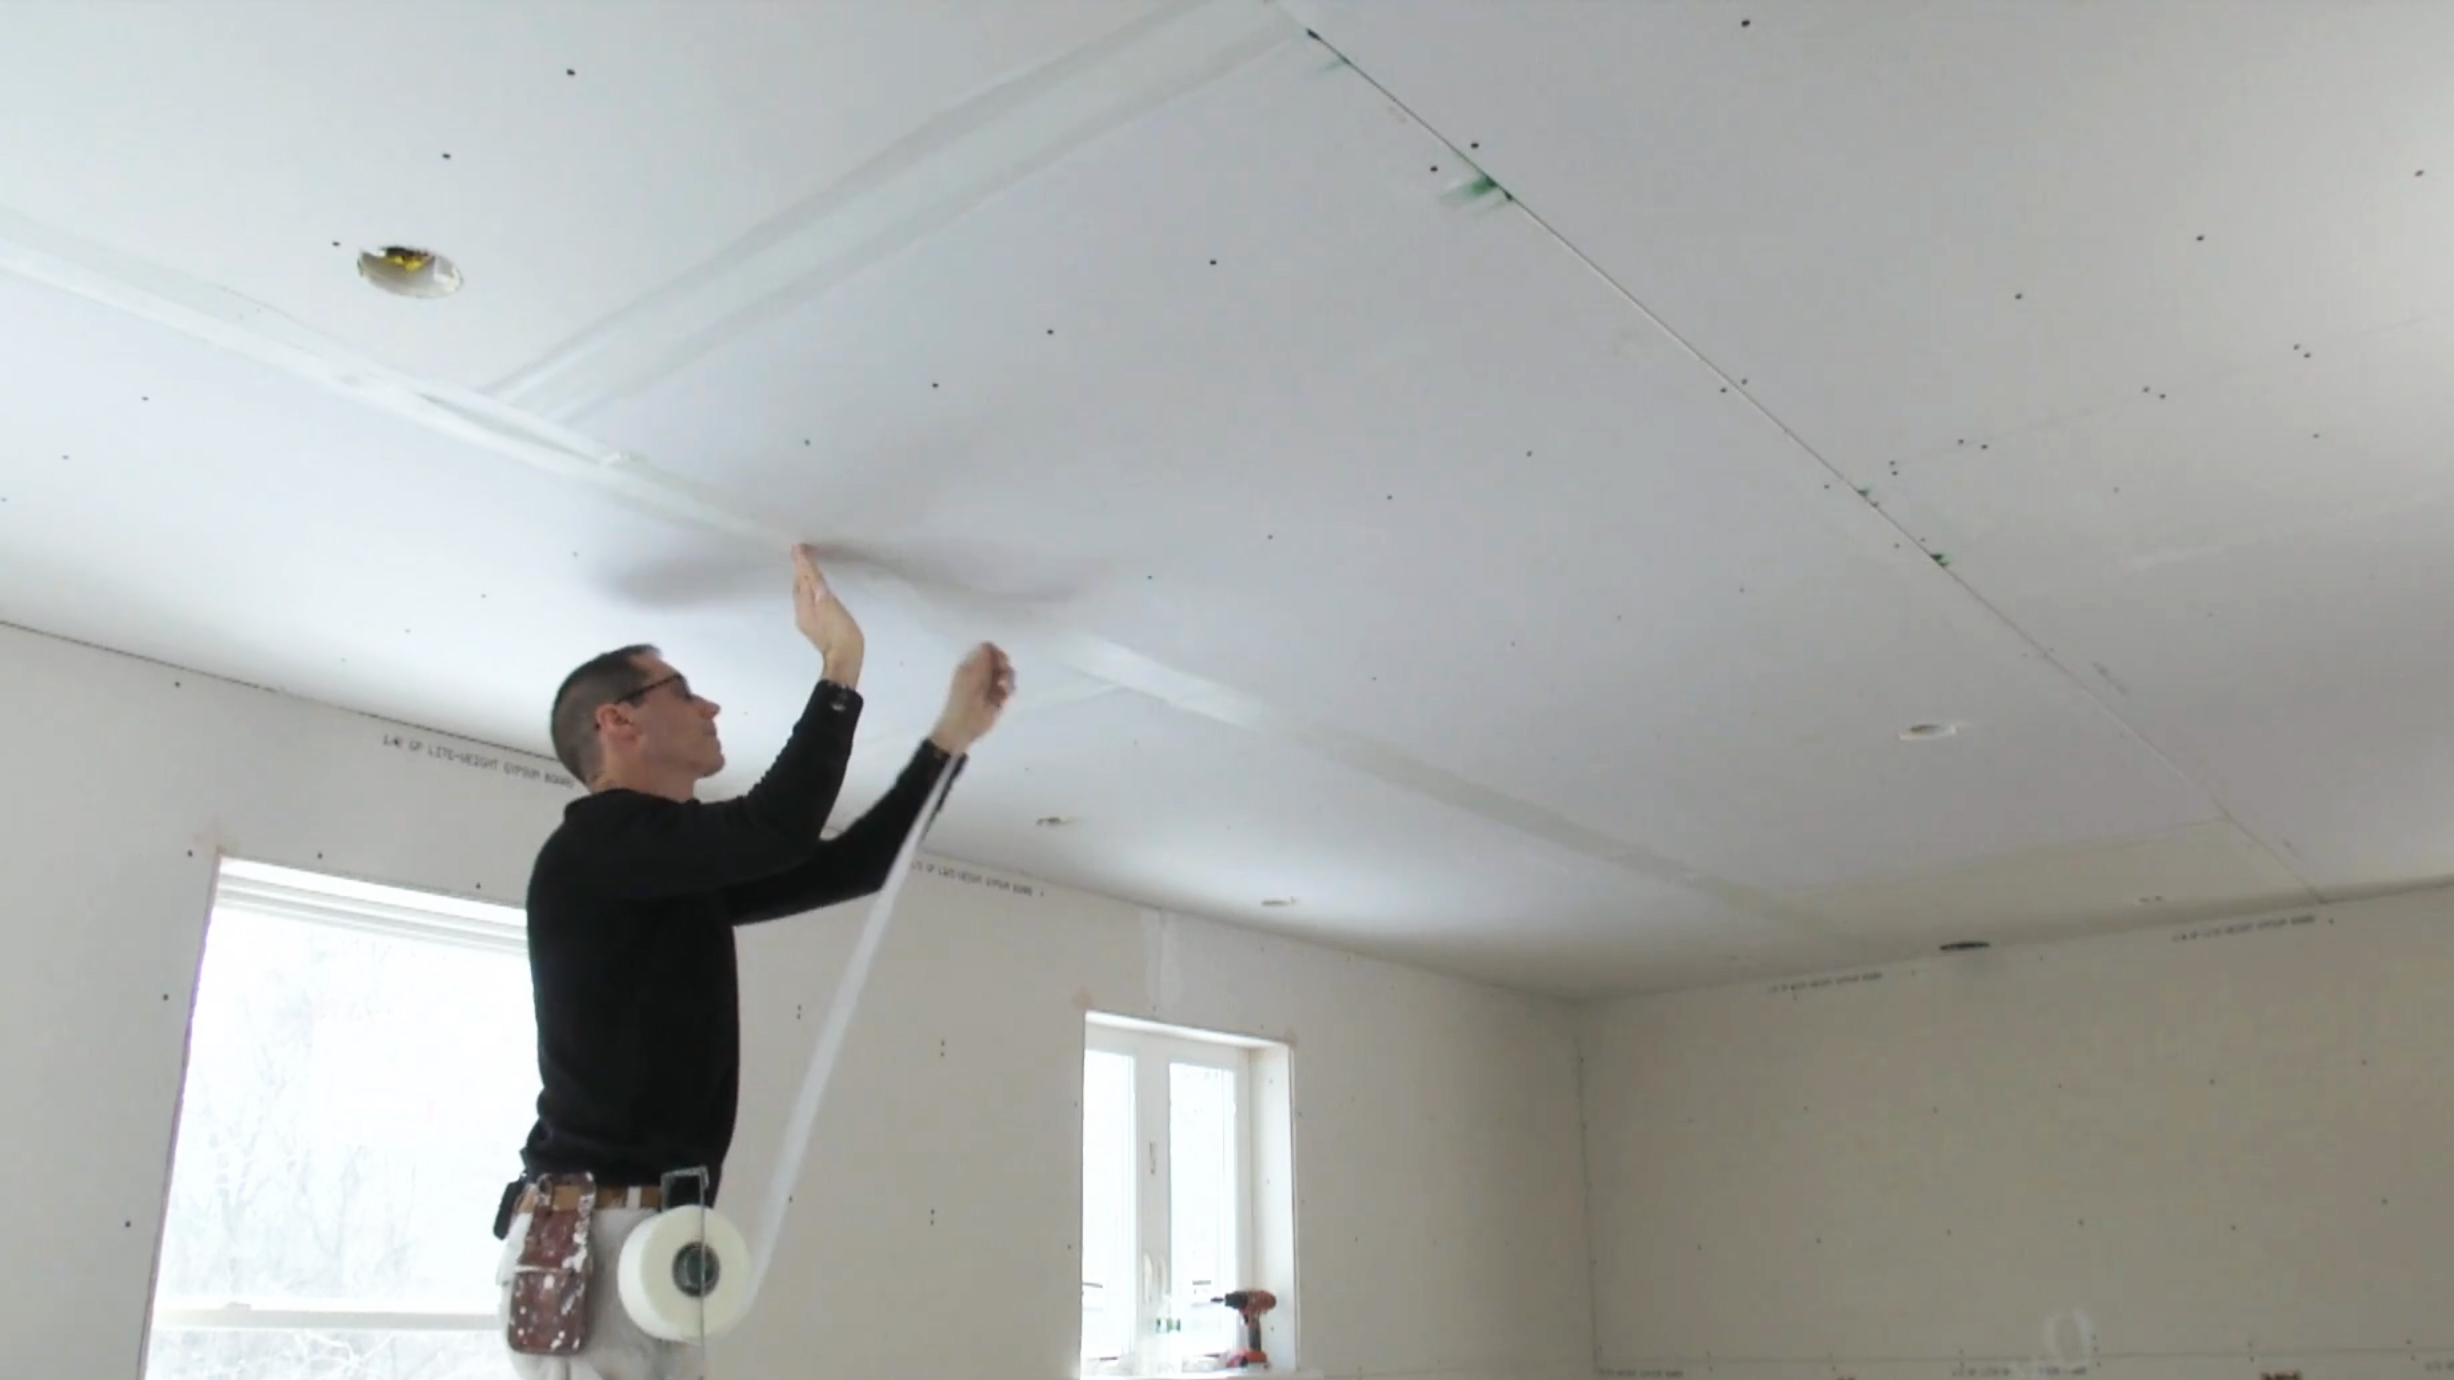 Myron taping drywall seams on the ceiling